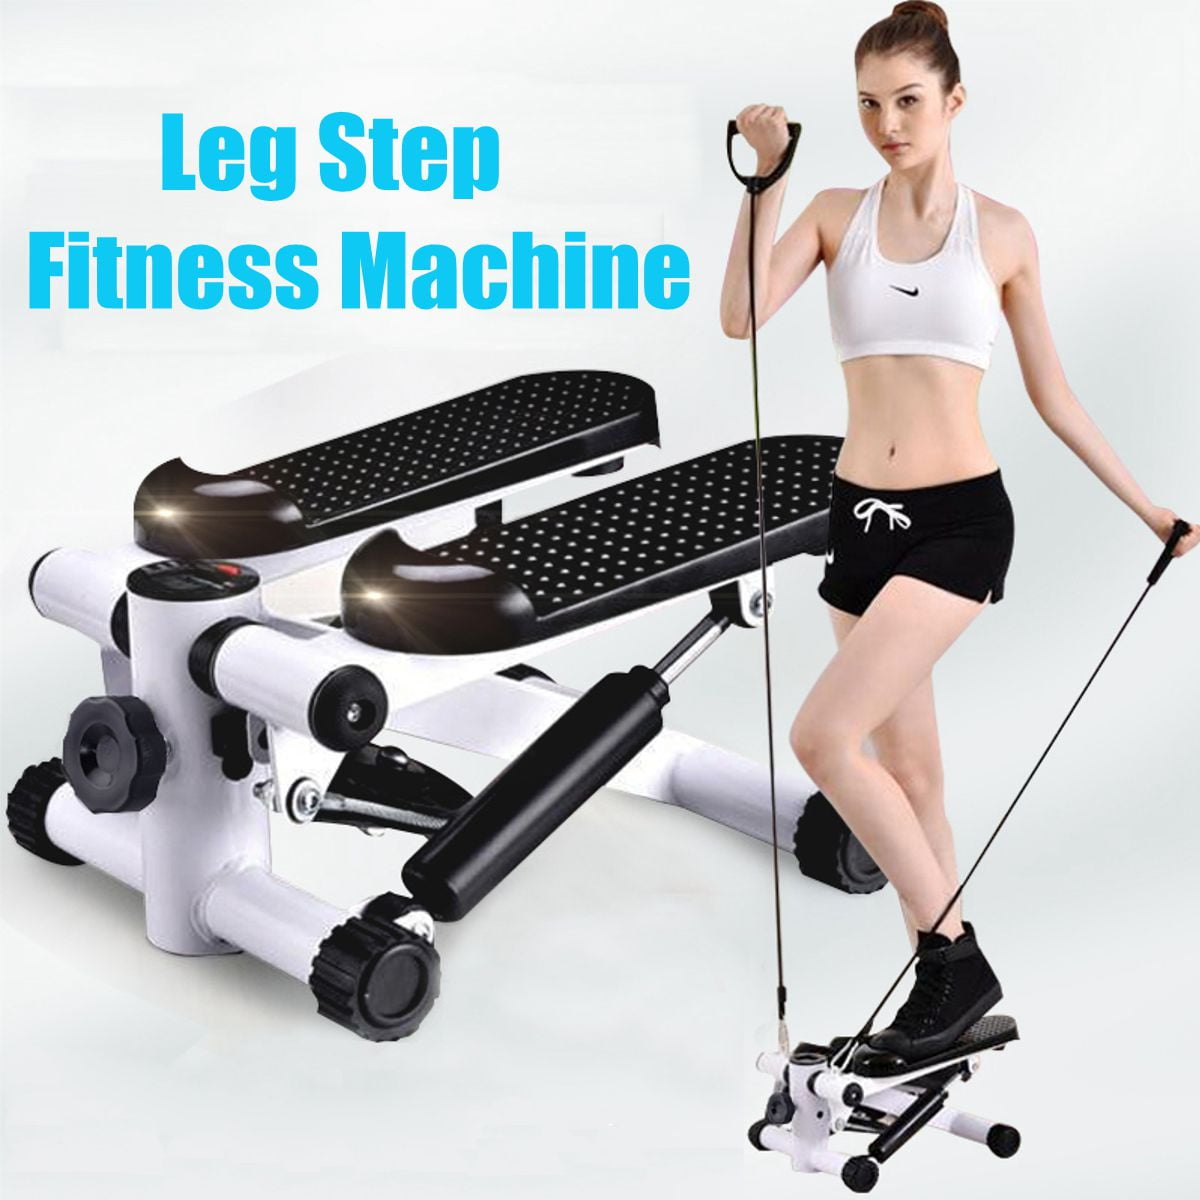 Sinbide Mini Stepper Fitness Stair Arm Cord Training Machine LCD Display & With Resistance Cords Gym Exercise Leg Thigh Toner Toning Workout Home Gym Equipment Up-Down-Stepper Exercise Fitness 